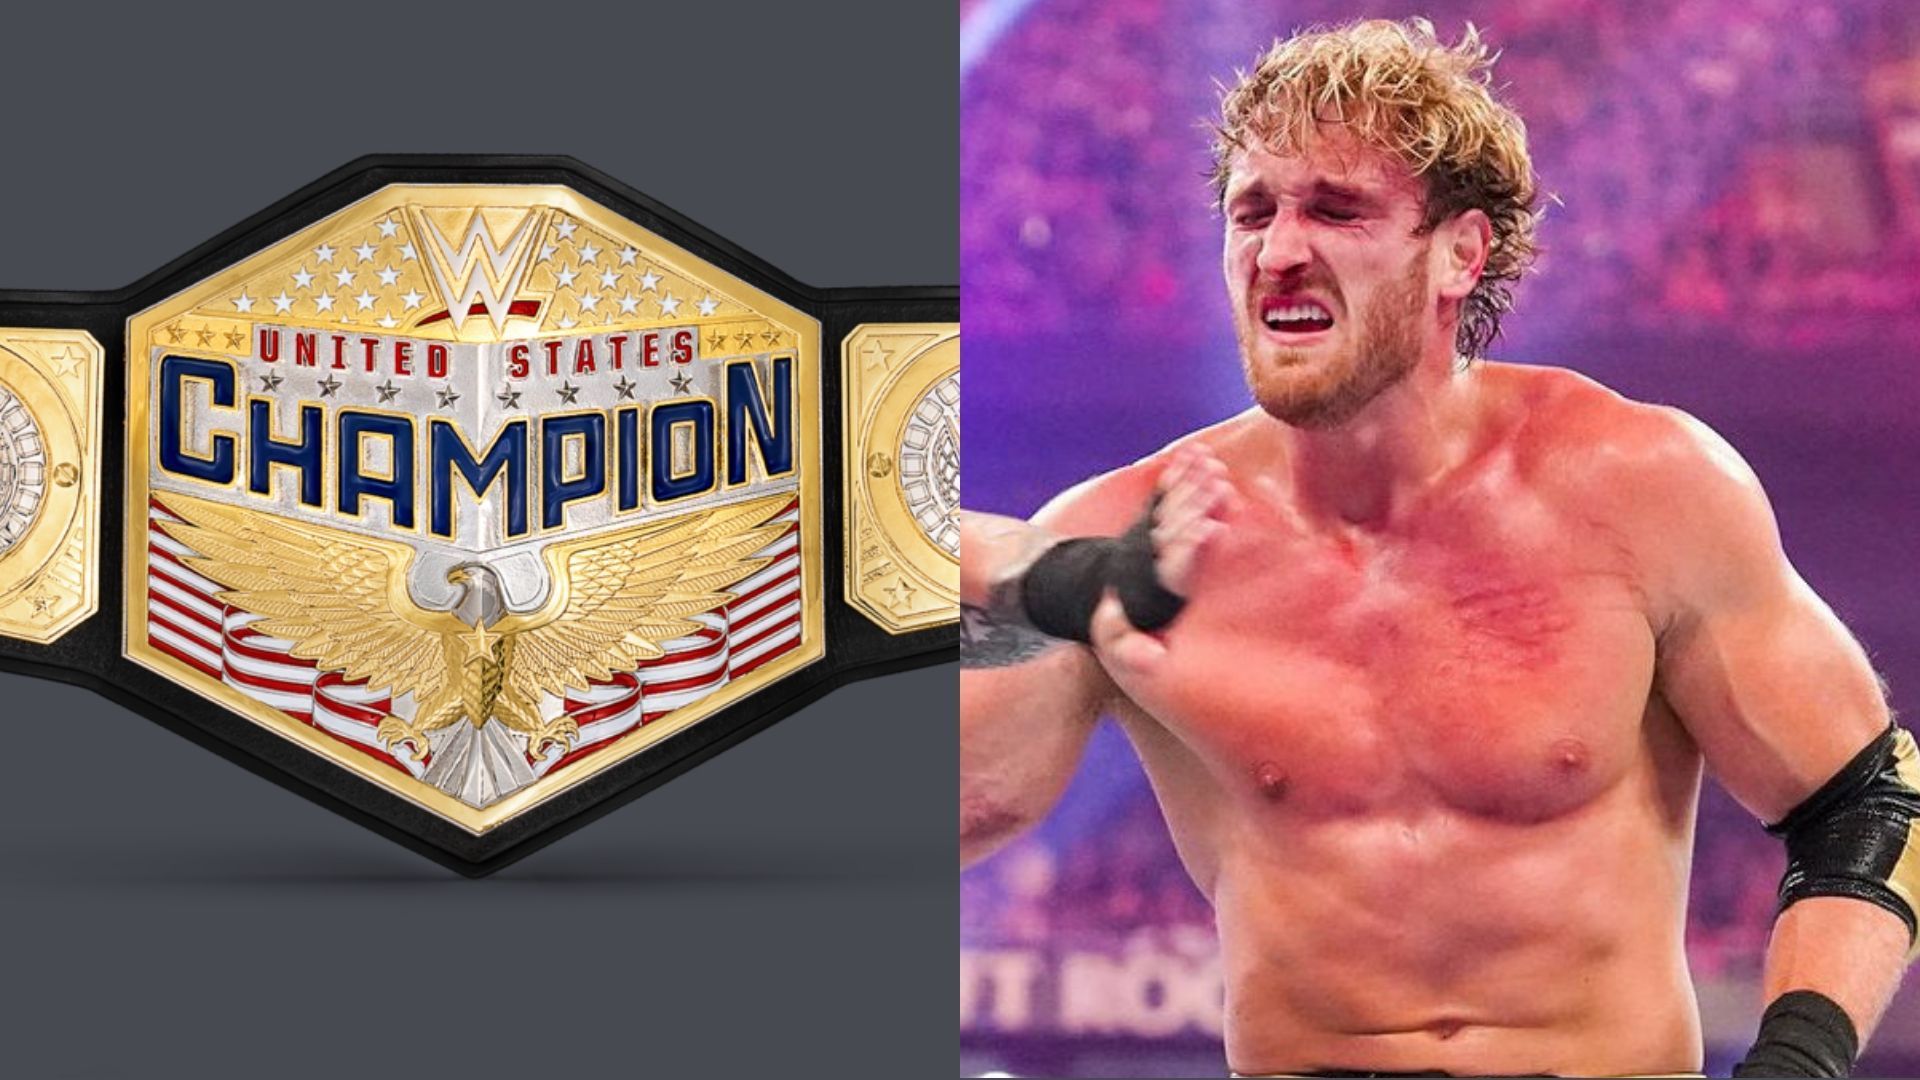 Logan Paul is the current United States Champion. 